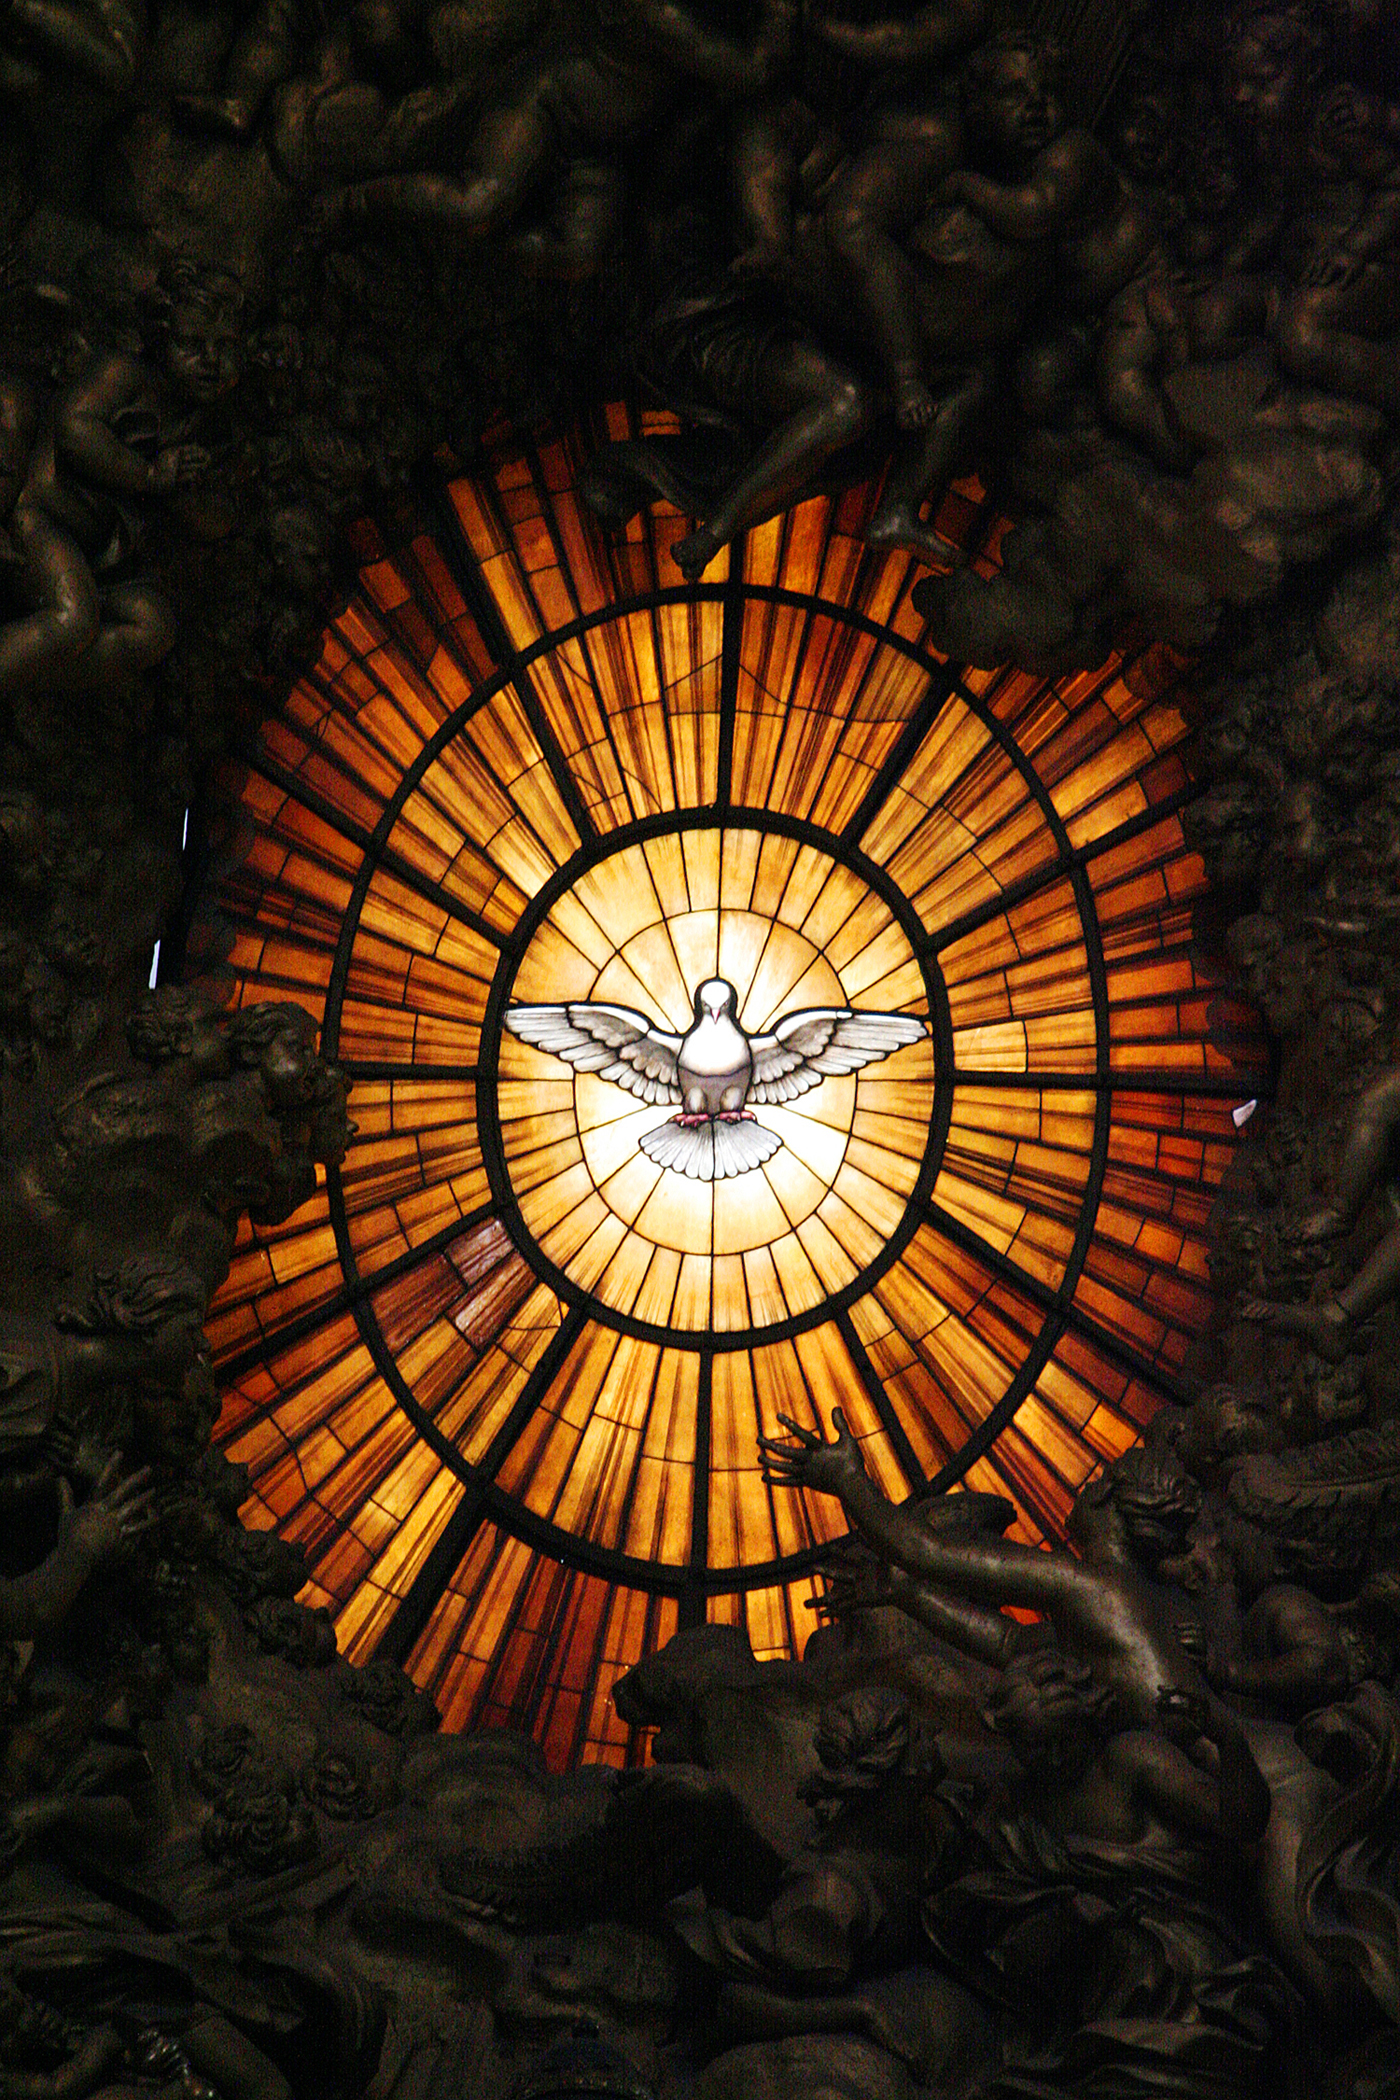 Stained glass window depicting the Holy Spirit. St. Peter's Basilica, Rome.